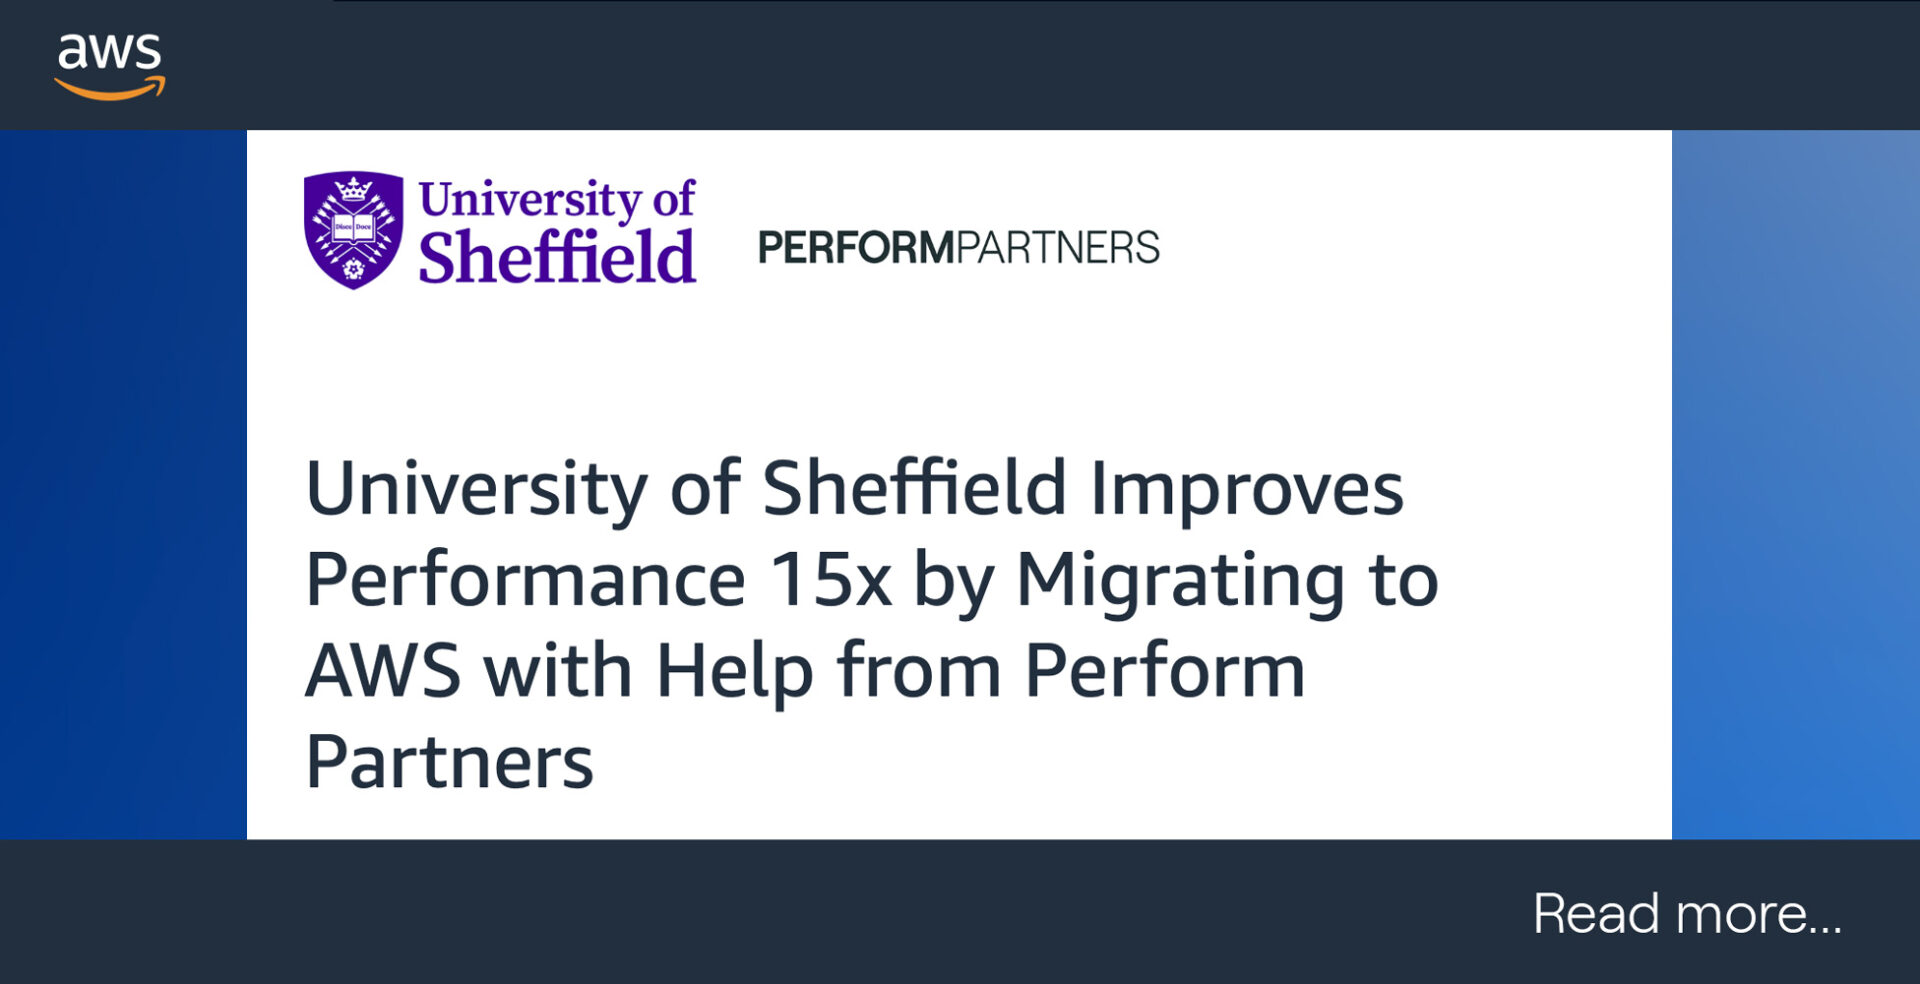 AWS and Perform Partners Delivery Migration for The University of Sheffield